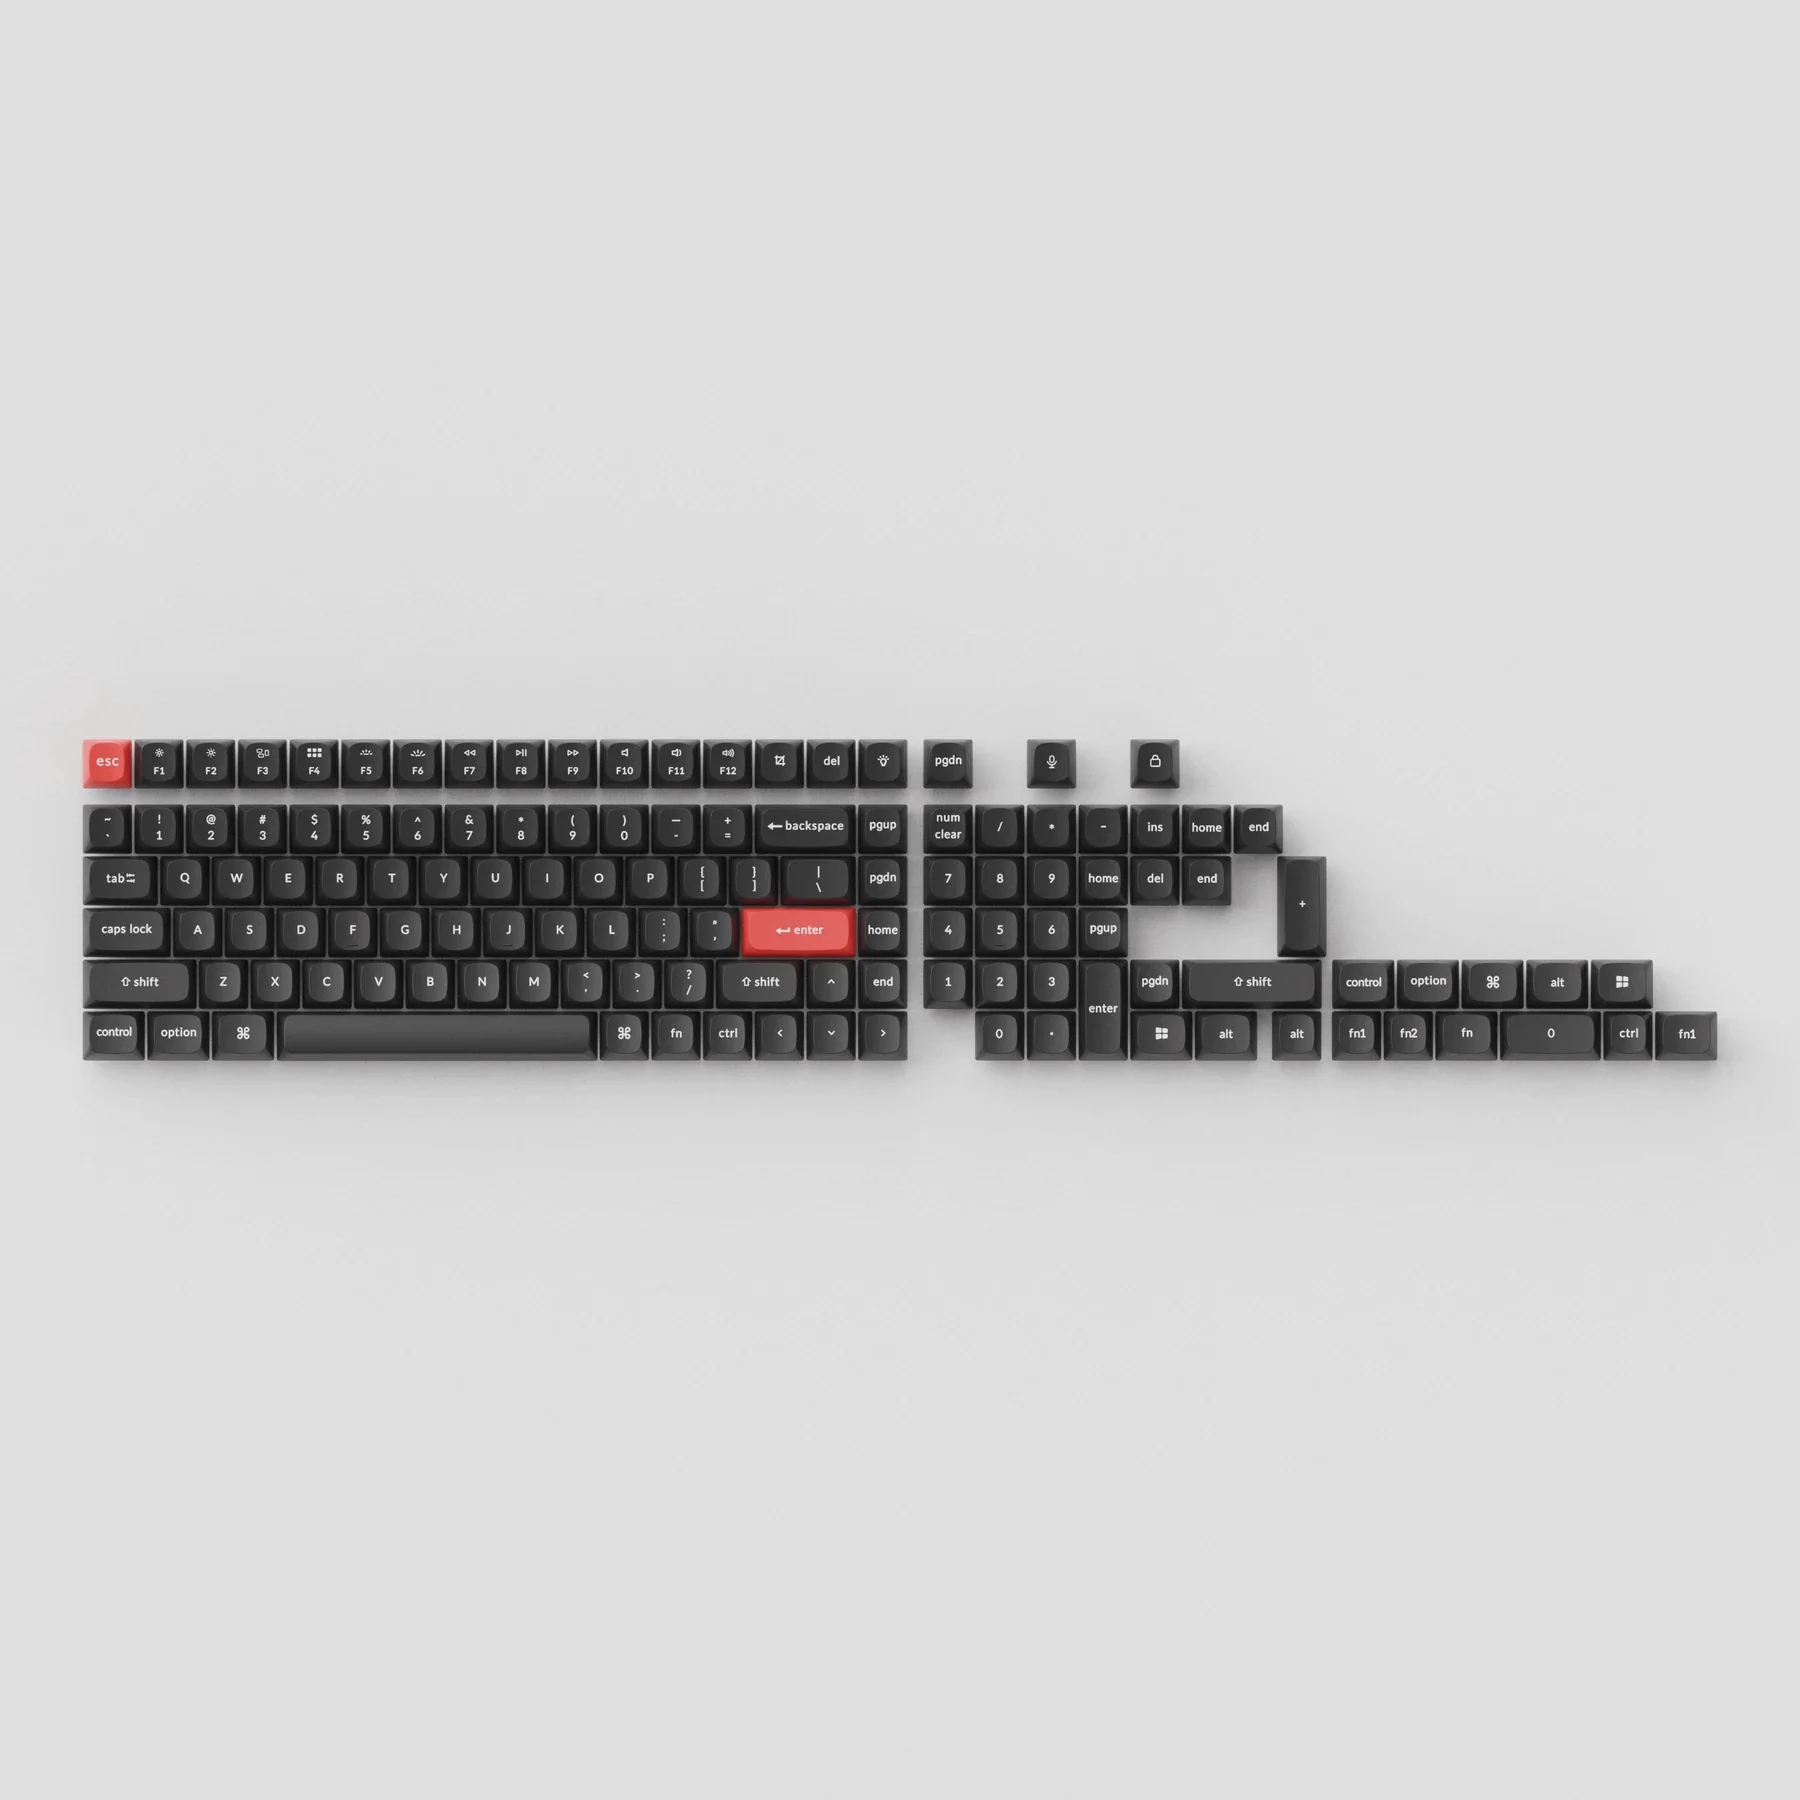 How to choose the mechanical keyboards - 4 Tips